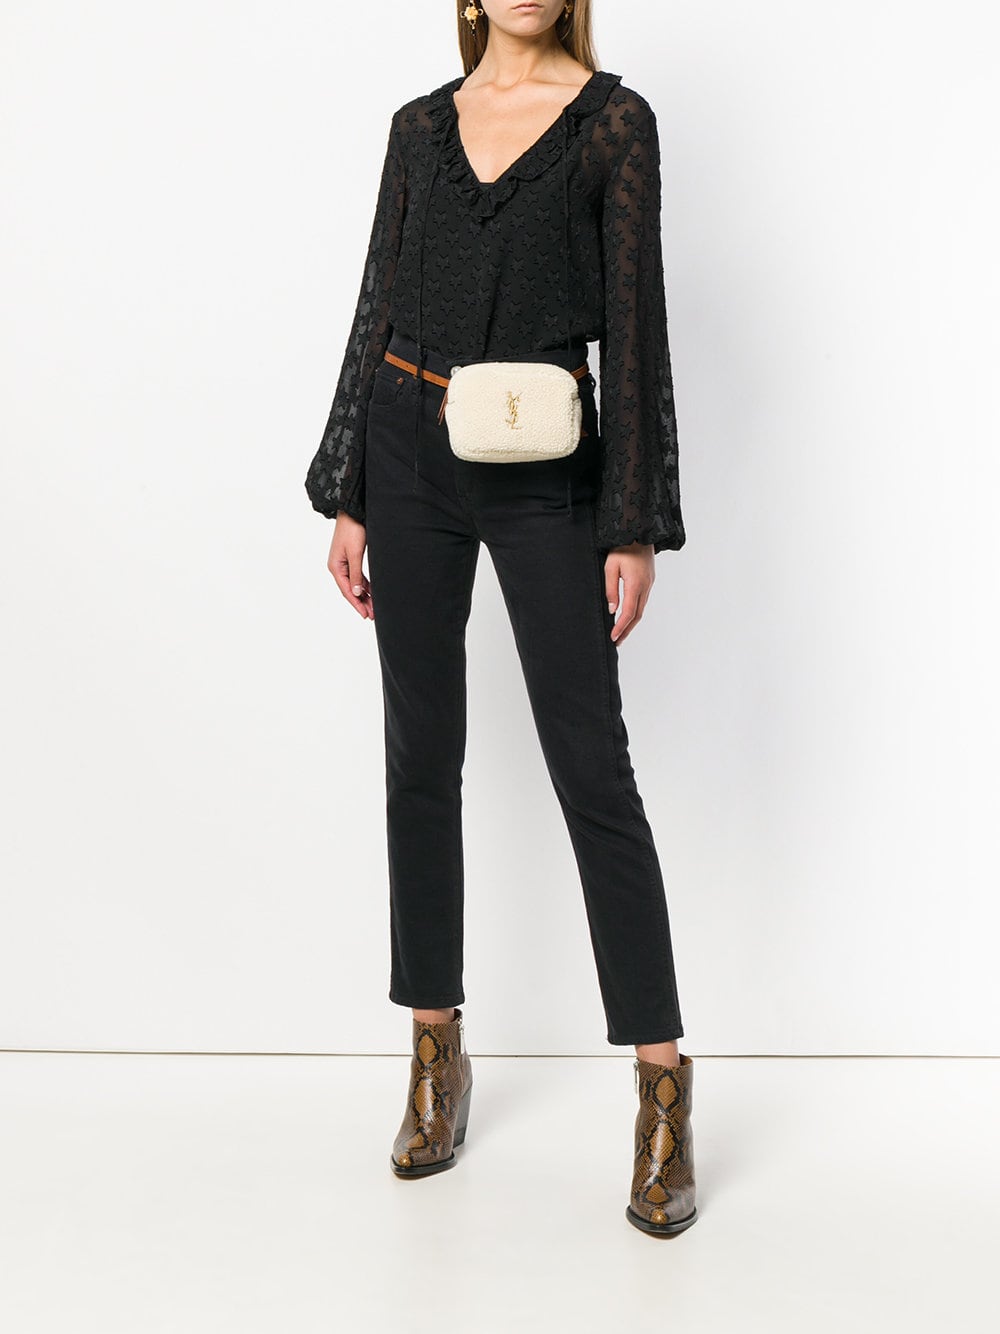 This YSL Shearling Lou Belt Bag Is Making Us Think Of The Colder